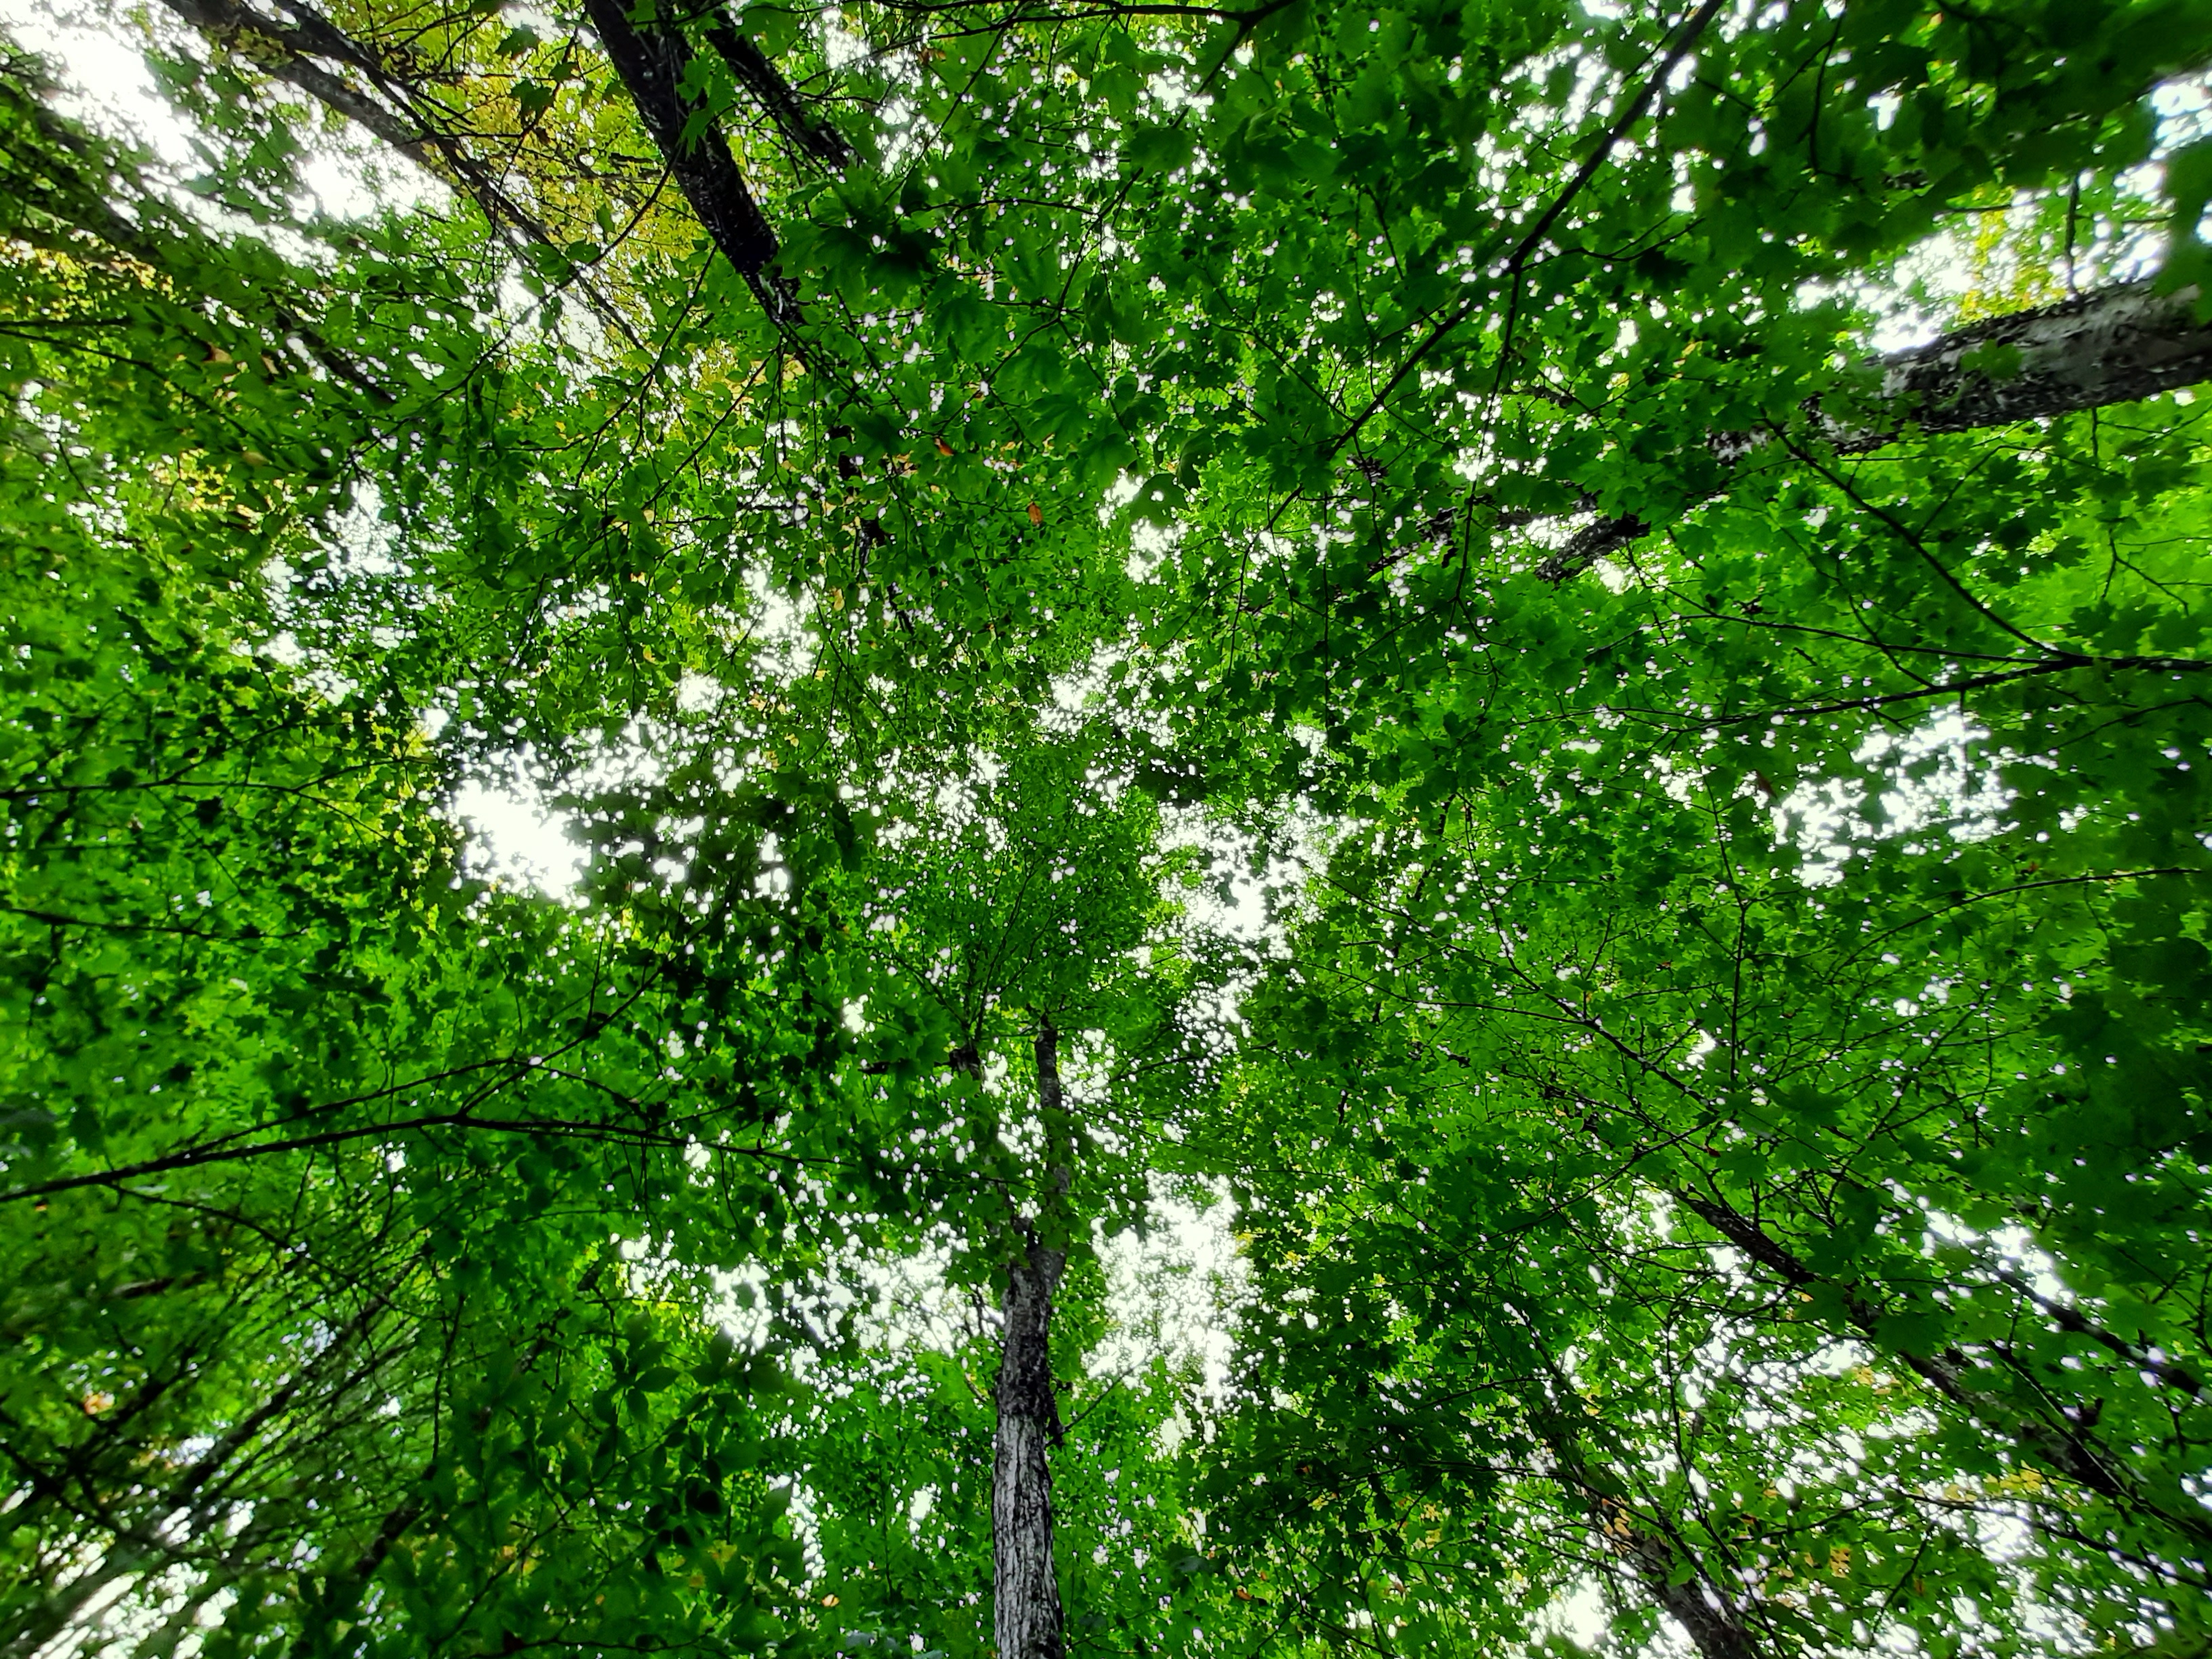 Looking up from the ground into a canopy of mature hardwood trees